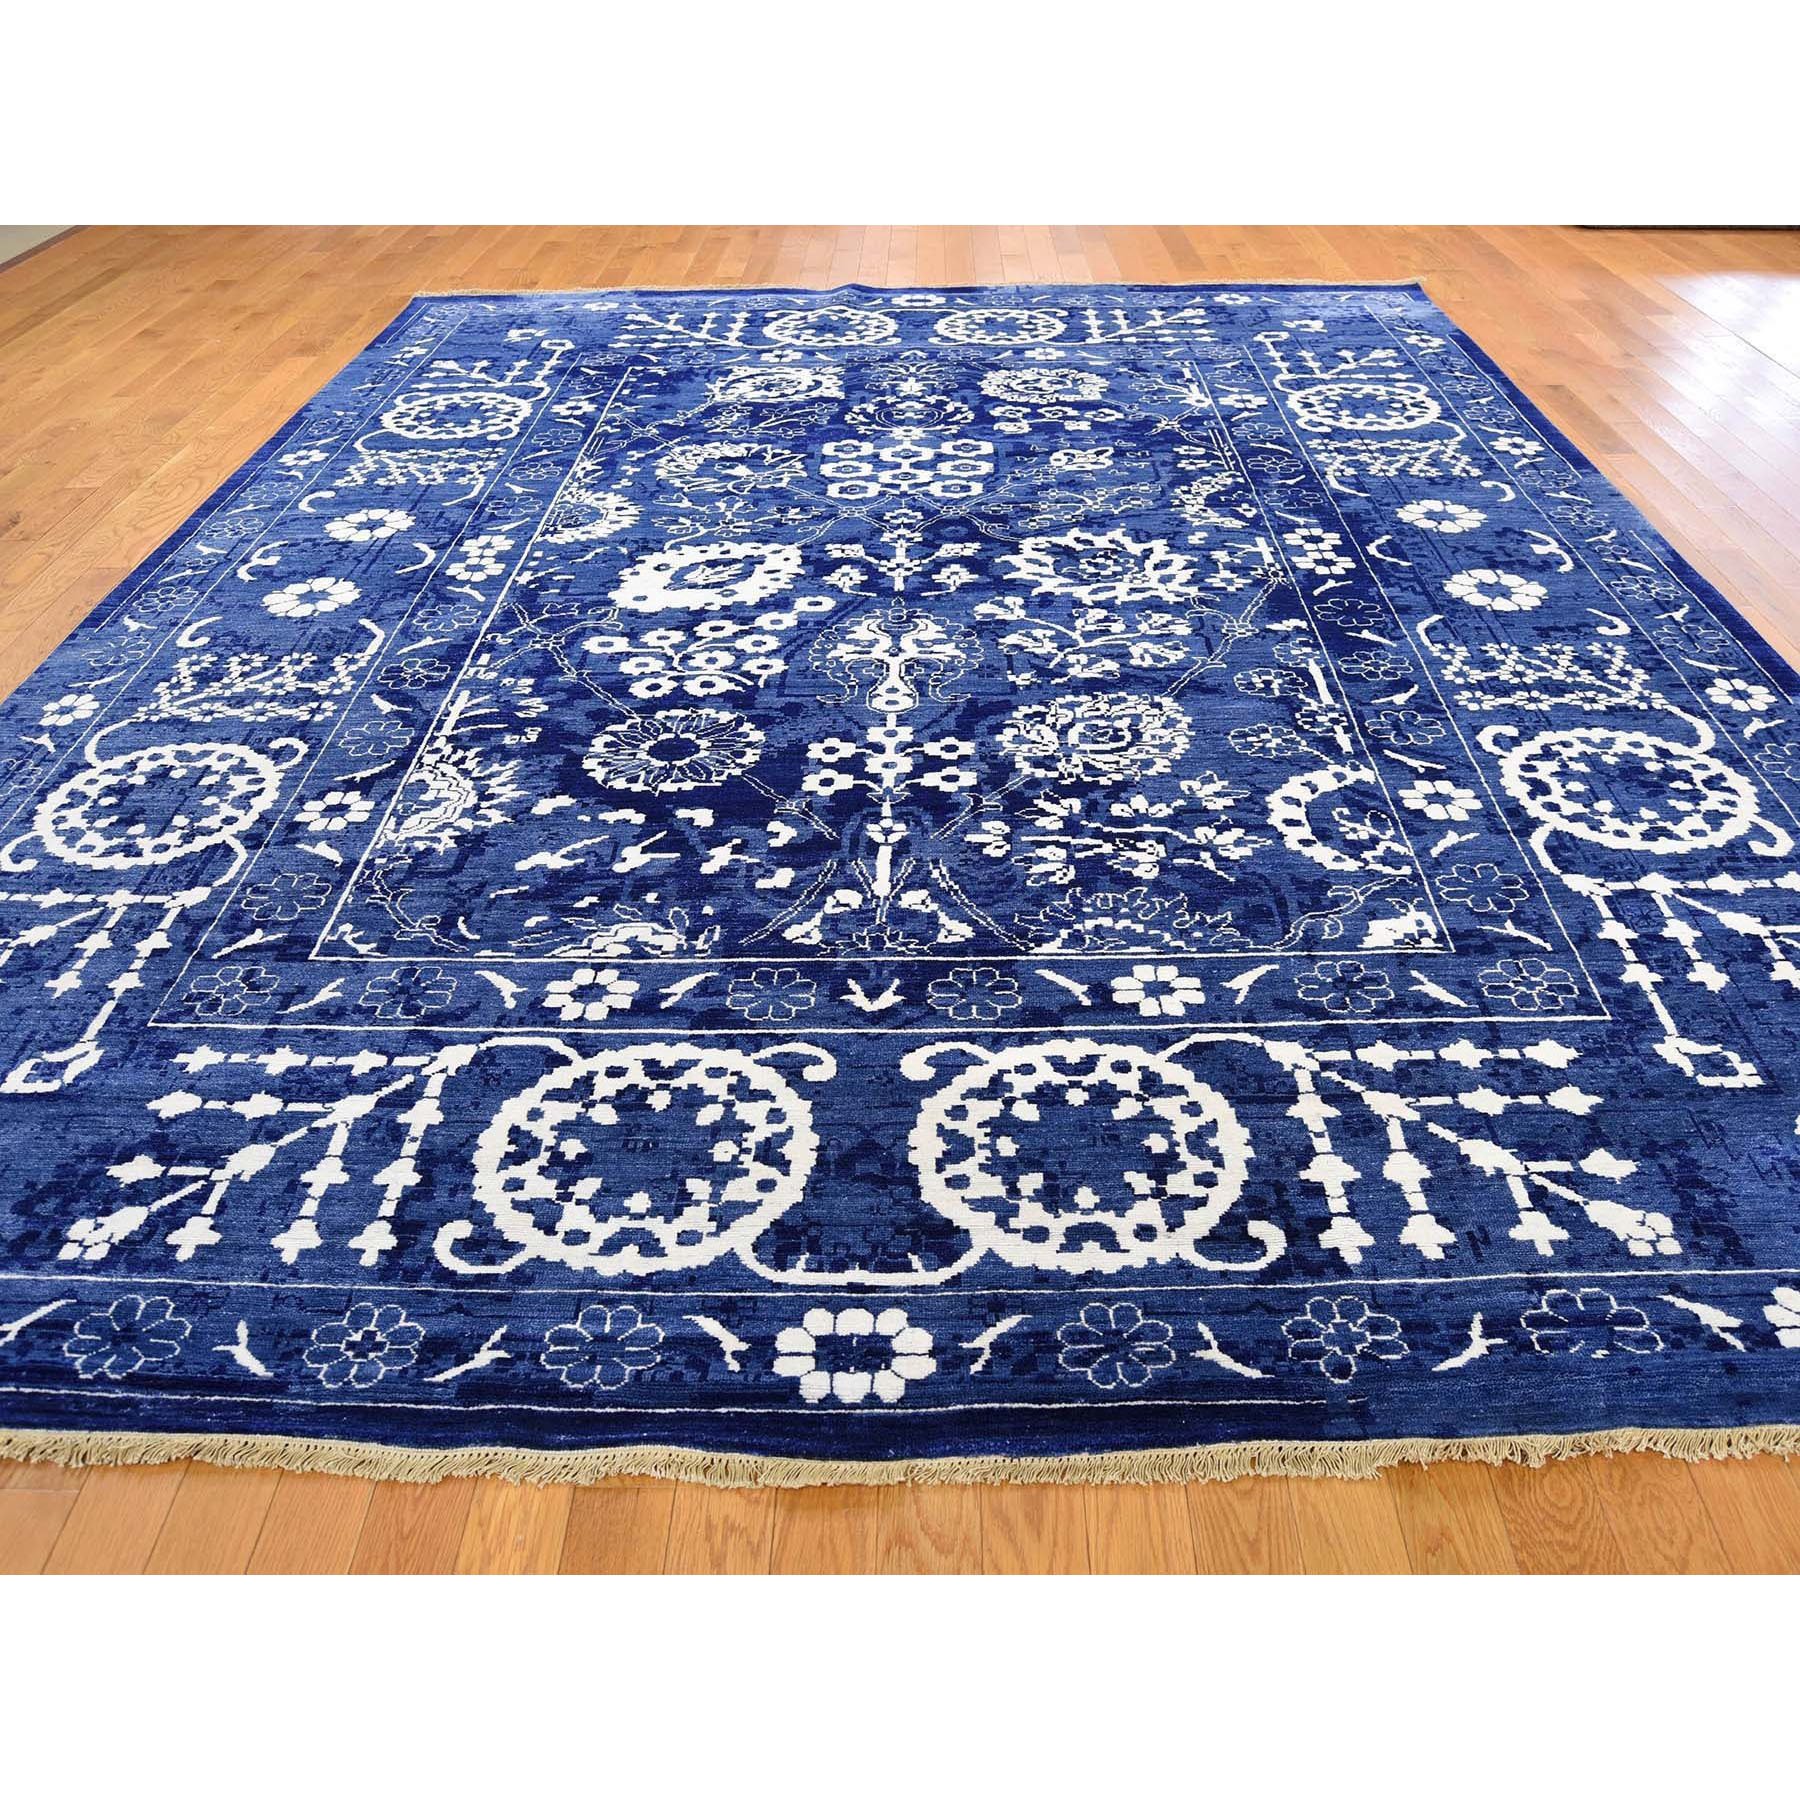 9-1 x12-1  Blue Wool And Silk Tone On Tone Tabriz Oriental Hand Knotted Rug 